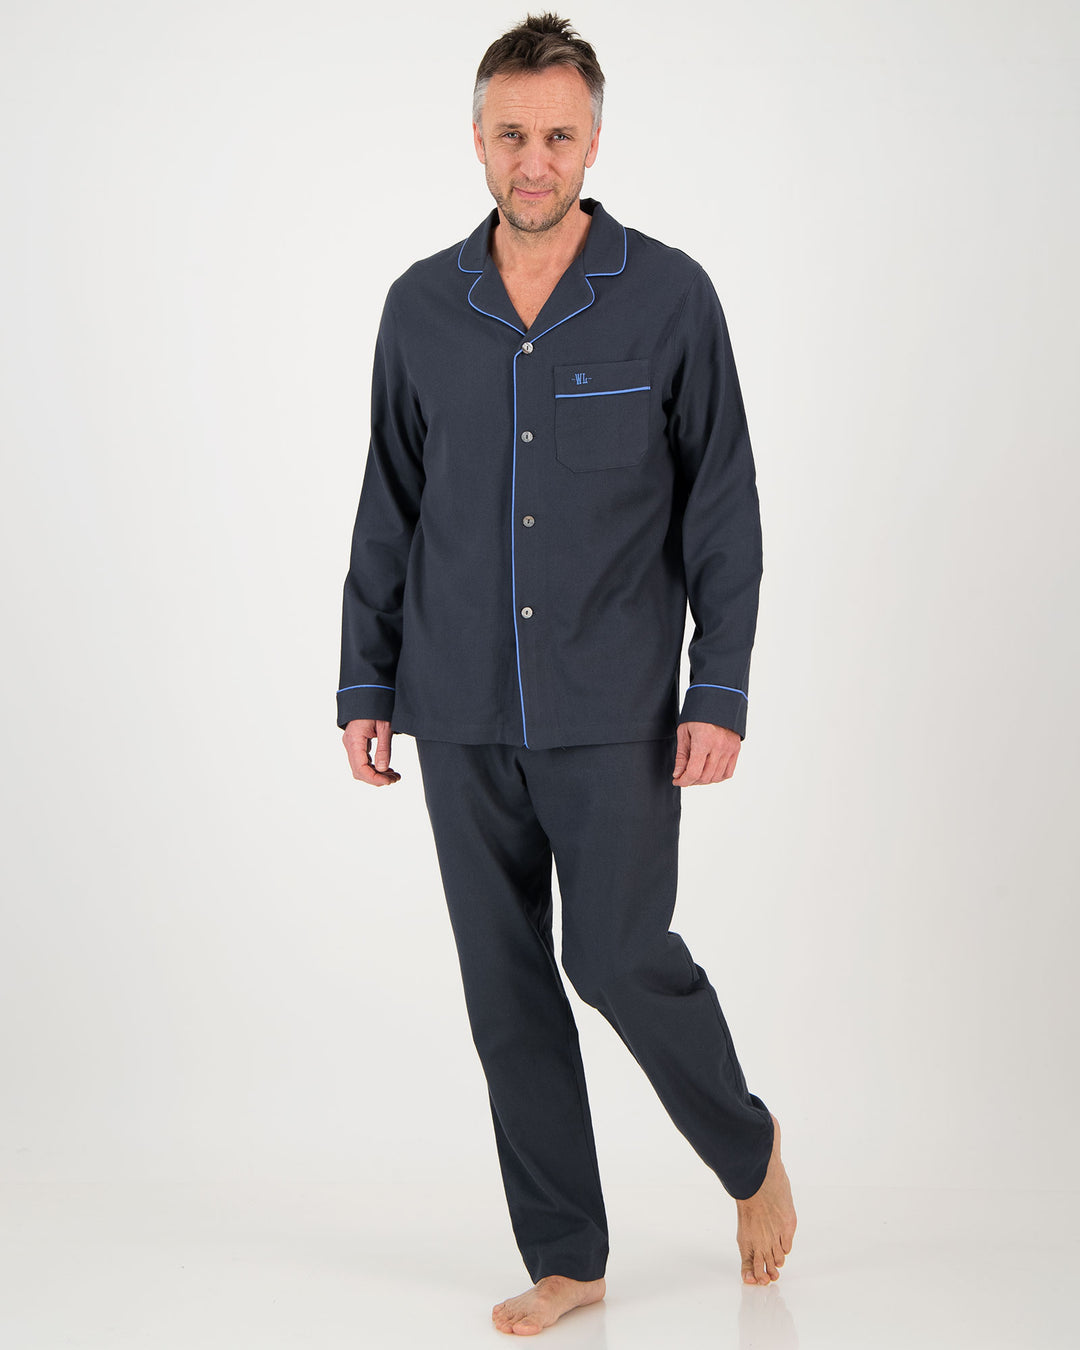 Mens Long Pyjamas Charcoal Flannel with Blue Piping Front - Woodstock Laundry